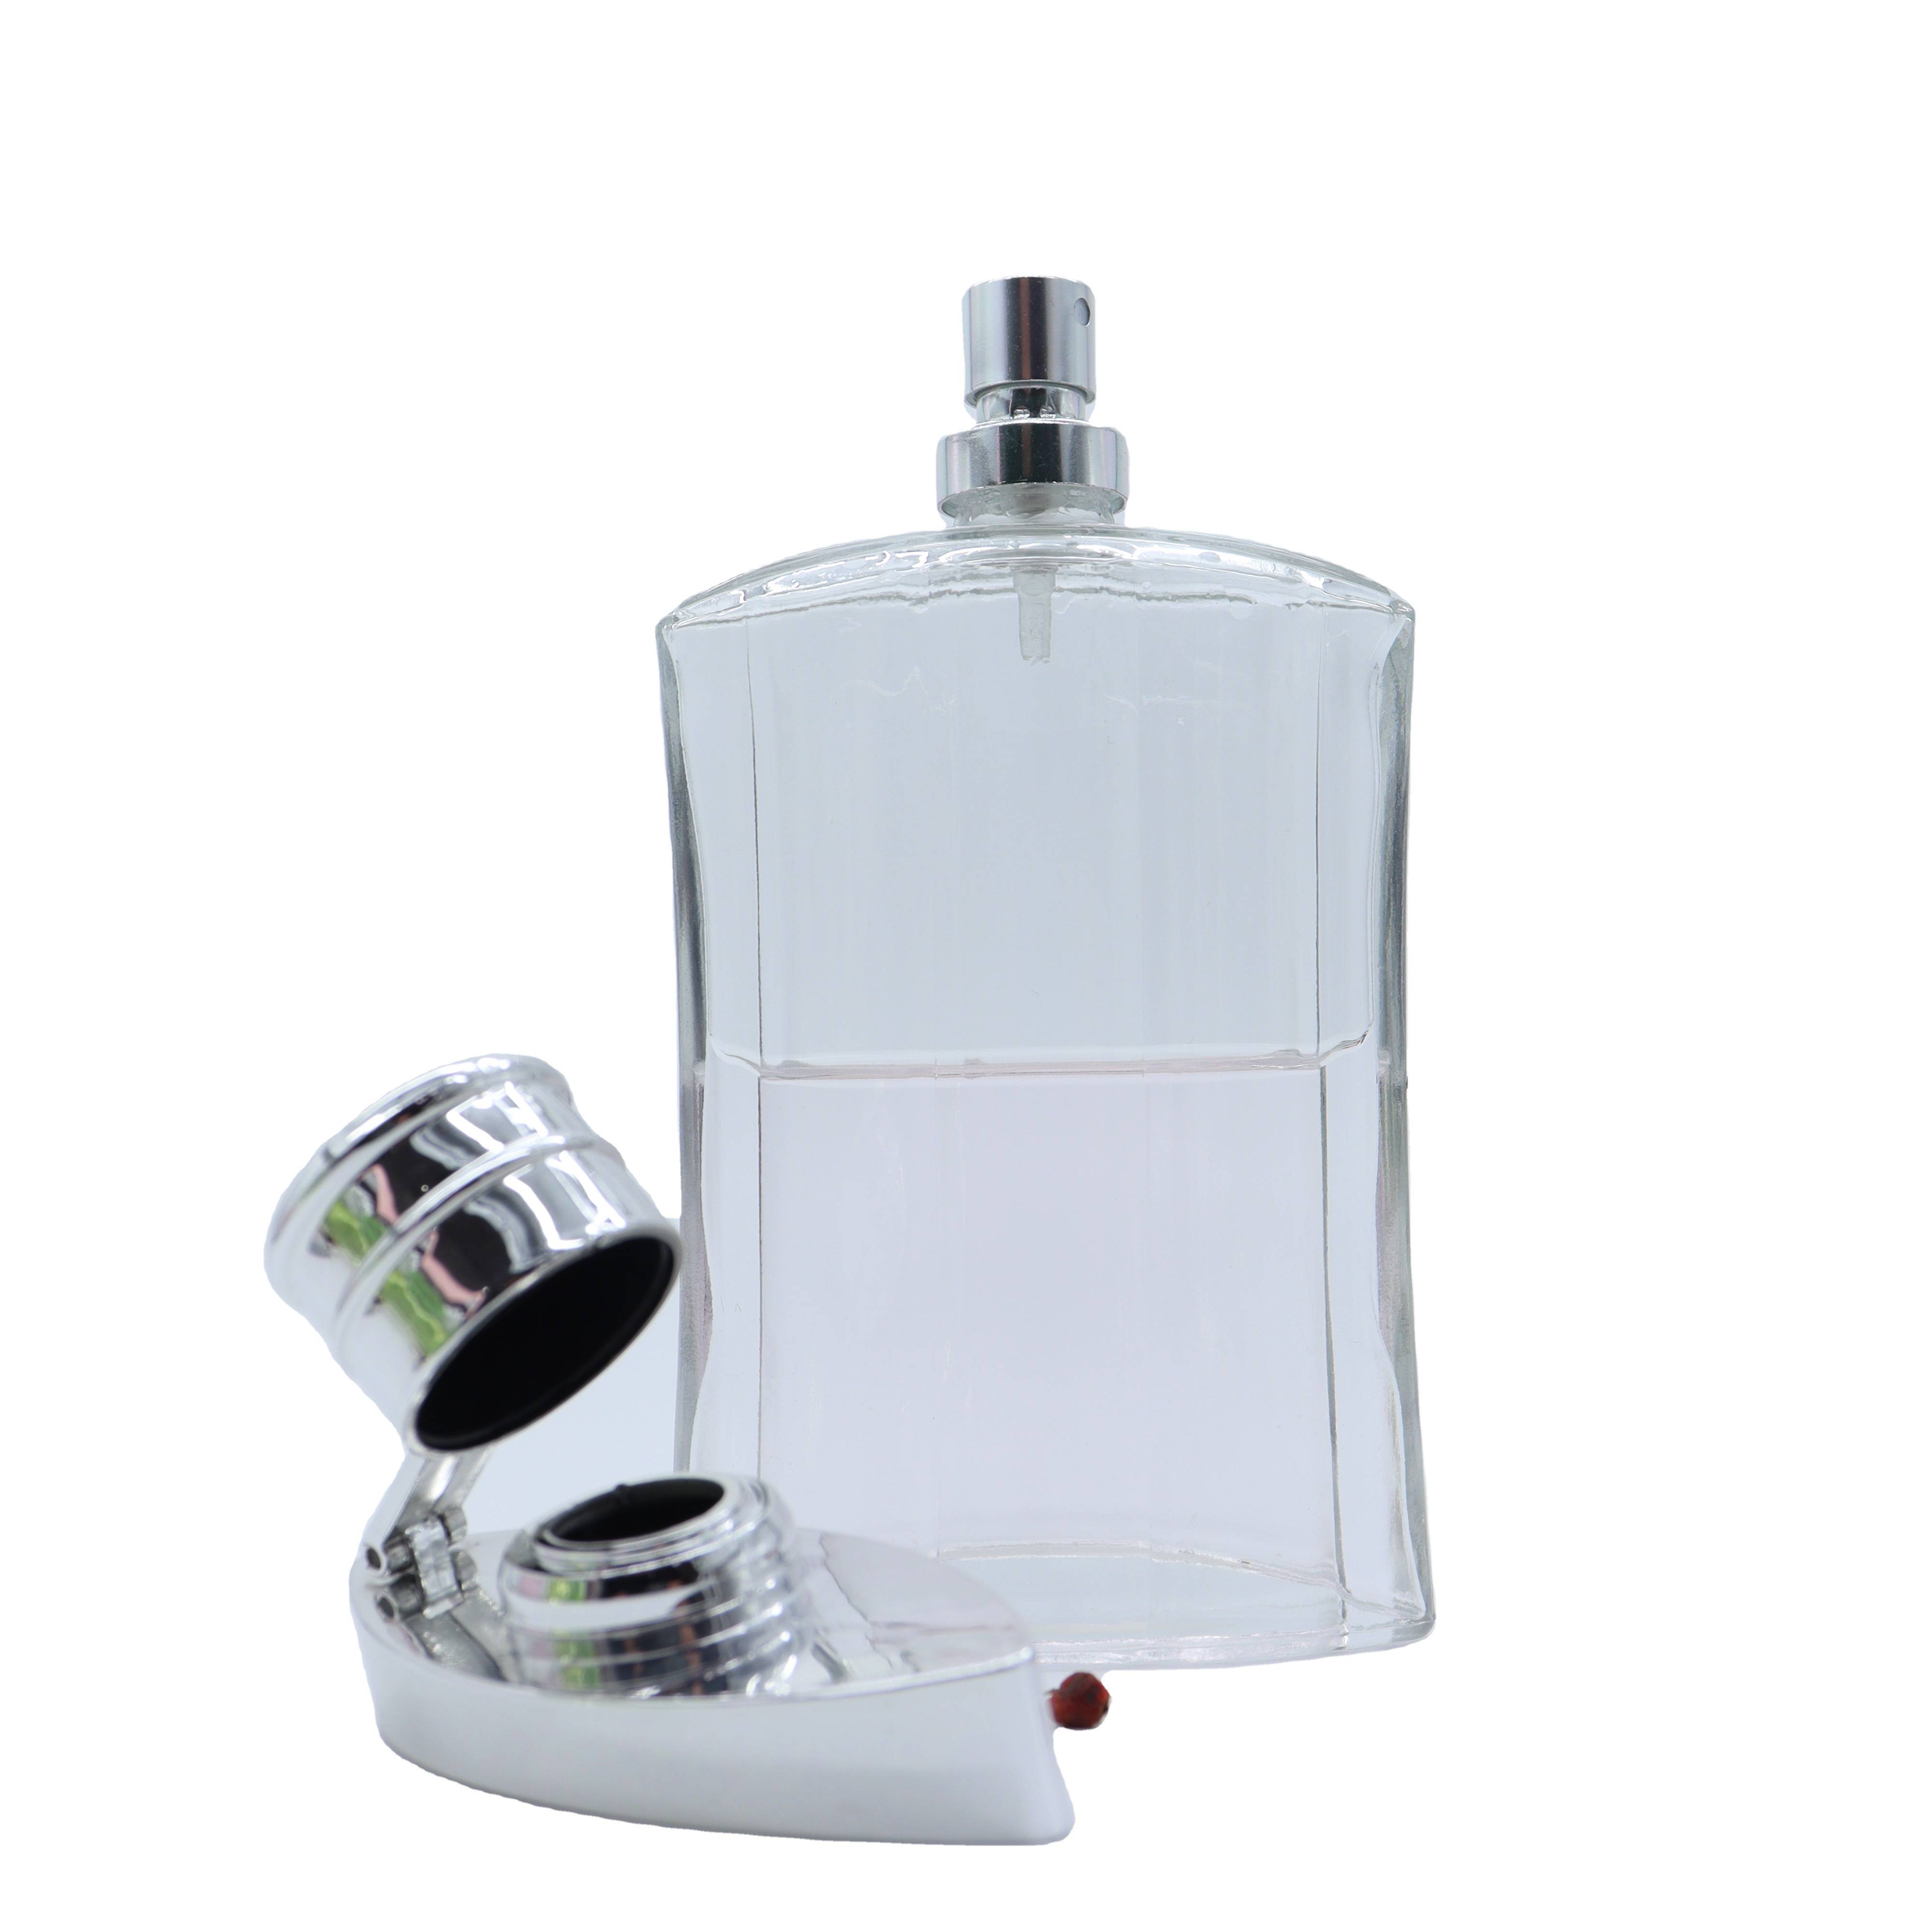 Wholesale perfume empty glass bottle hot new products 2021 Cute designed with pump spray Featured Image